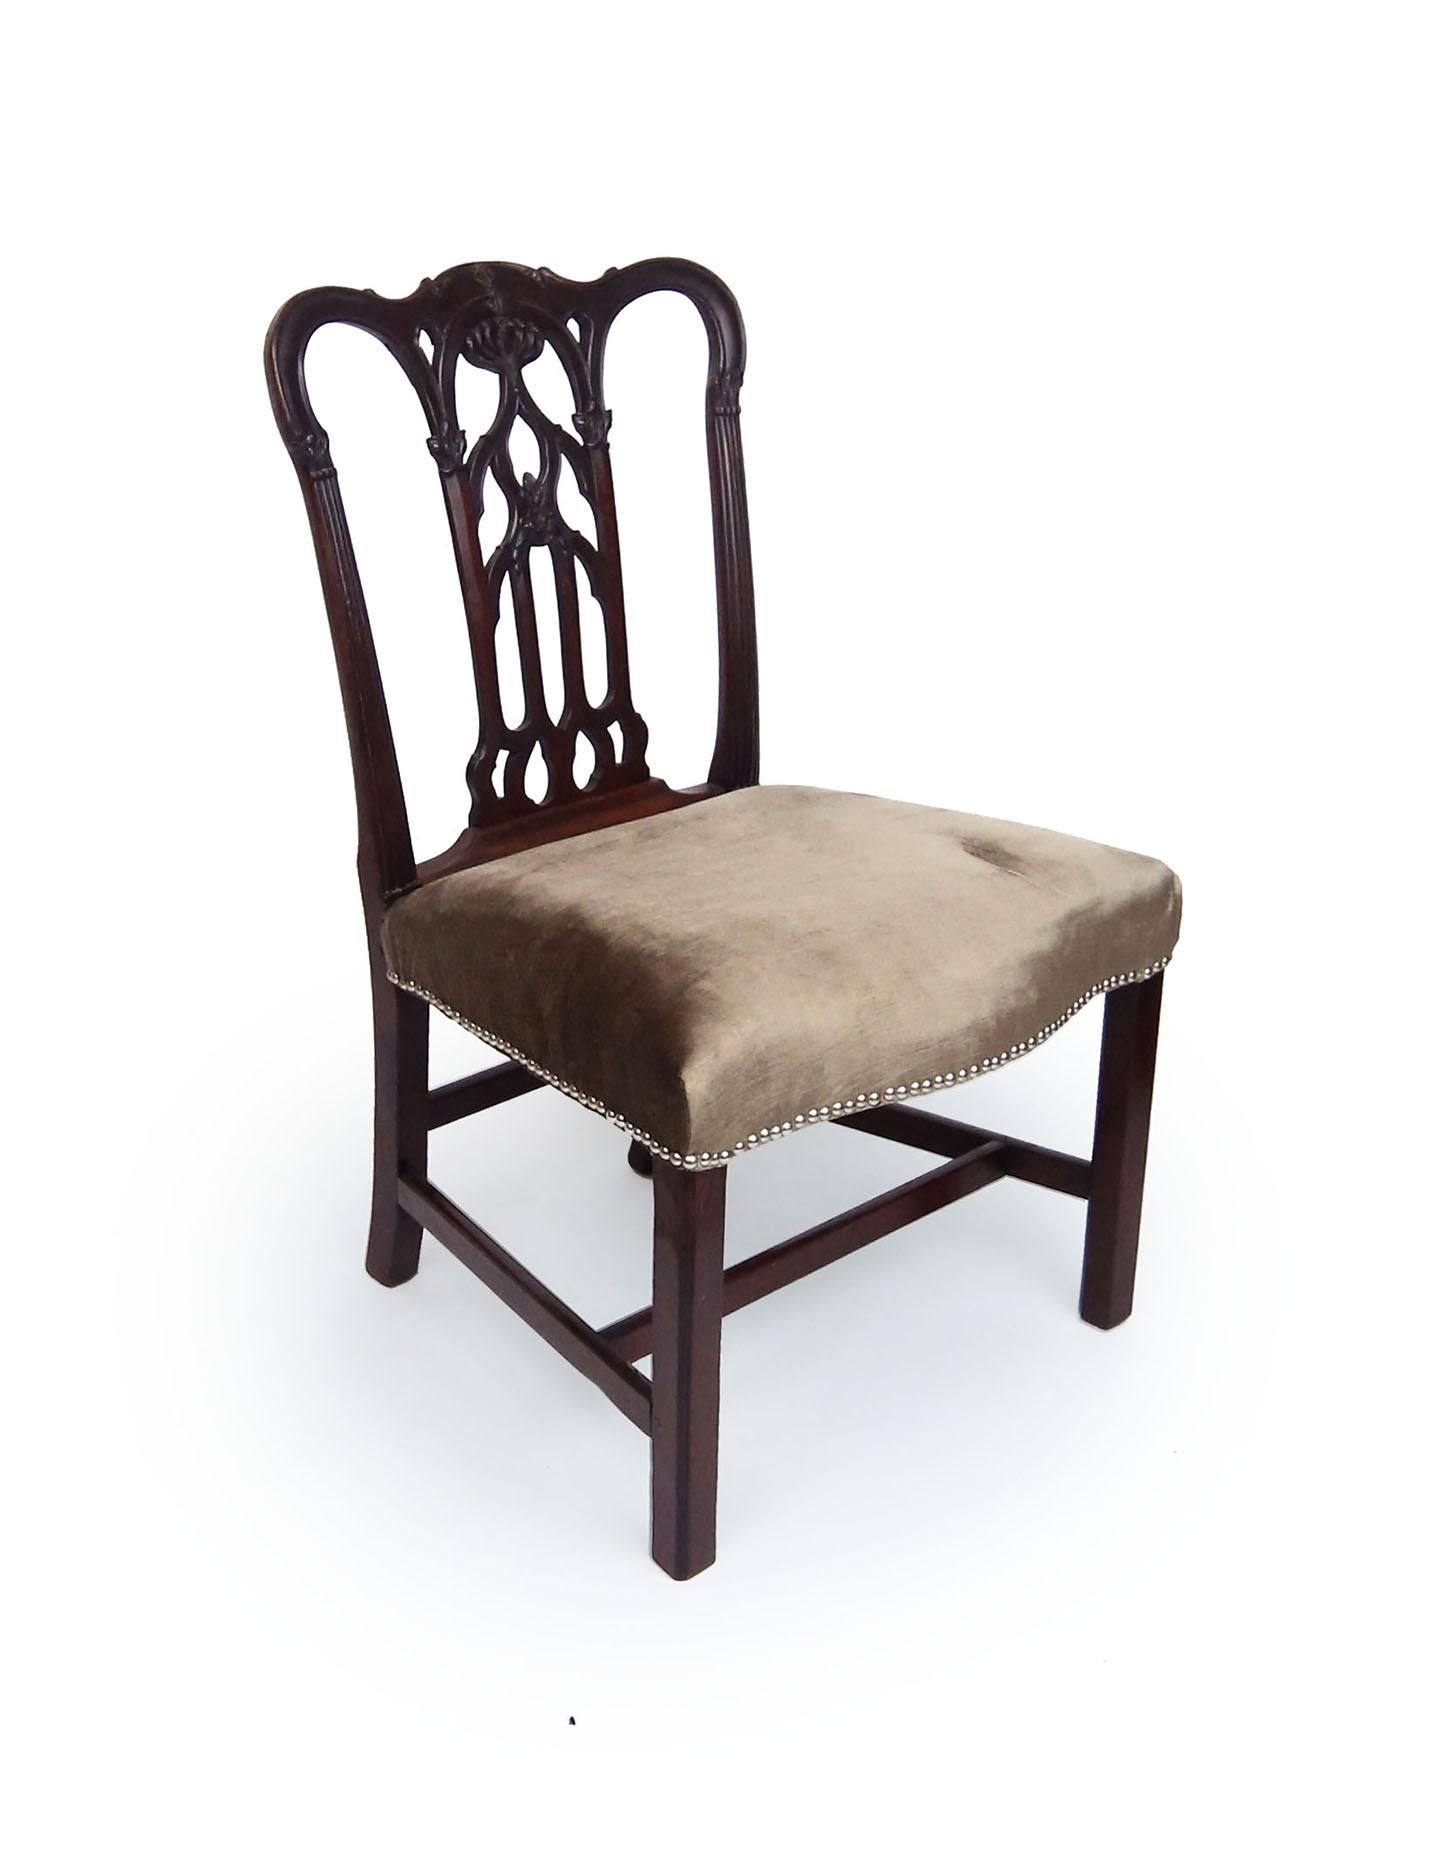 Graceful mahogany Chippendale side chair featuring Gothic tracery on its pierced splat with fine carving. Fluted styles with acanthus capitals. Original finish and reupholstered in a charcoal velvet with brushed nickel tacks on the over upholstered